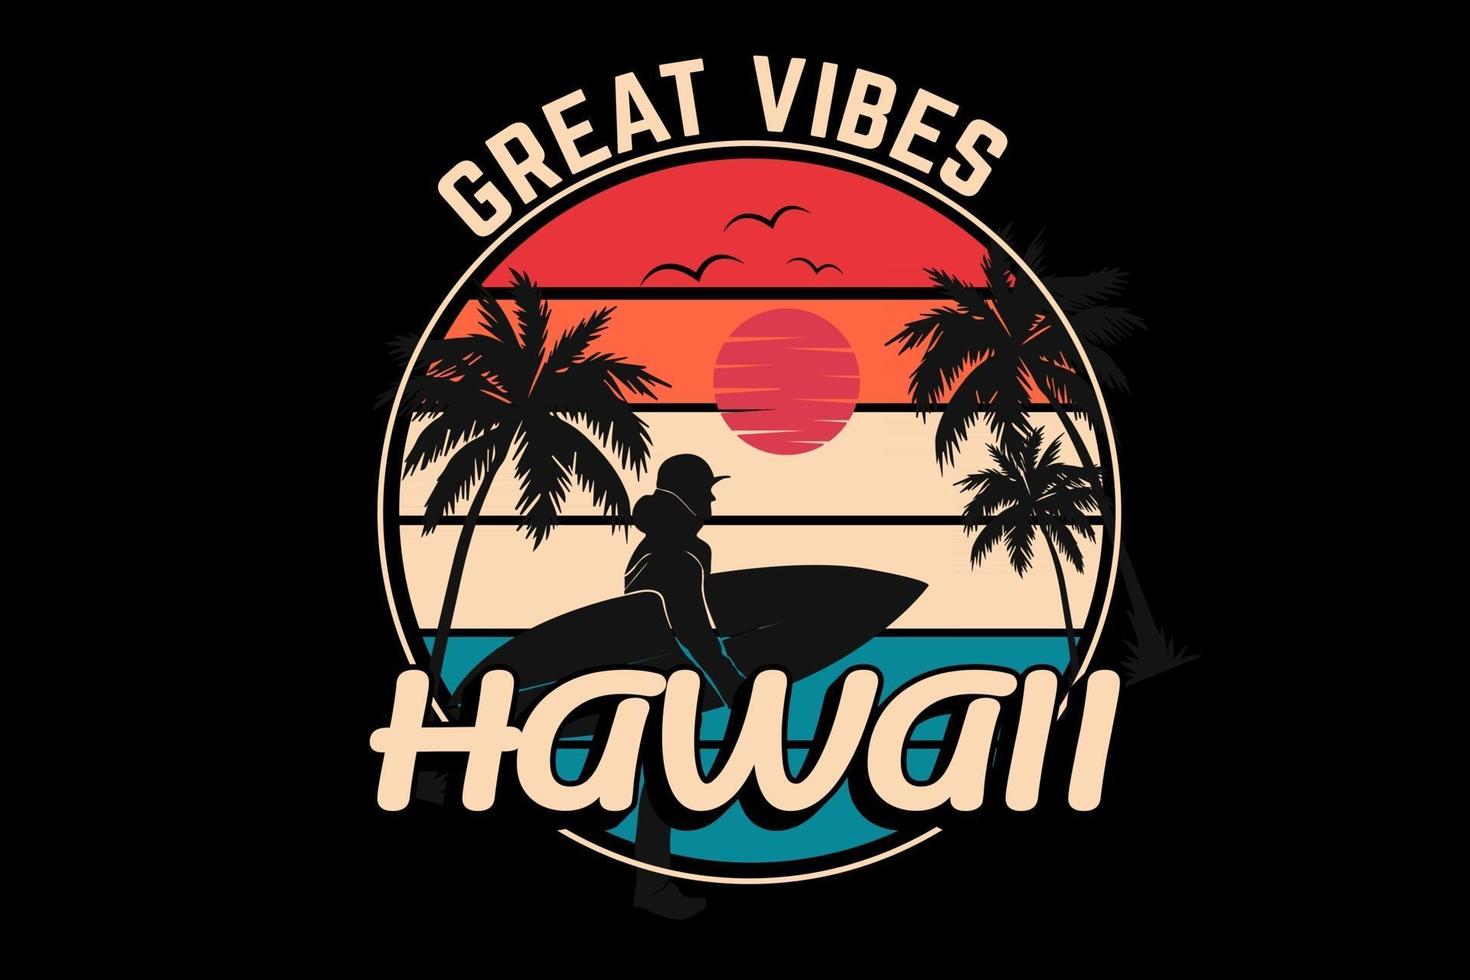 great vibes hawaii silhouette design retro vintage style vector